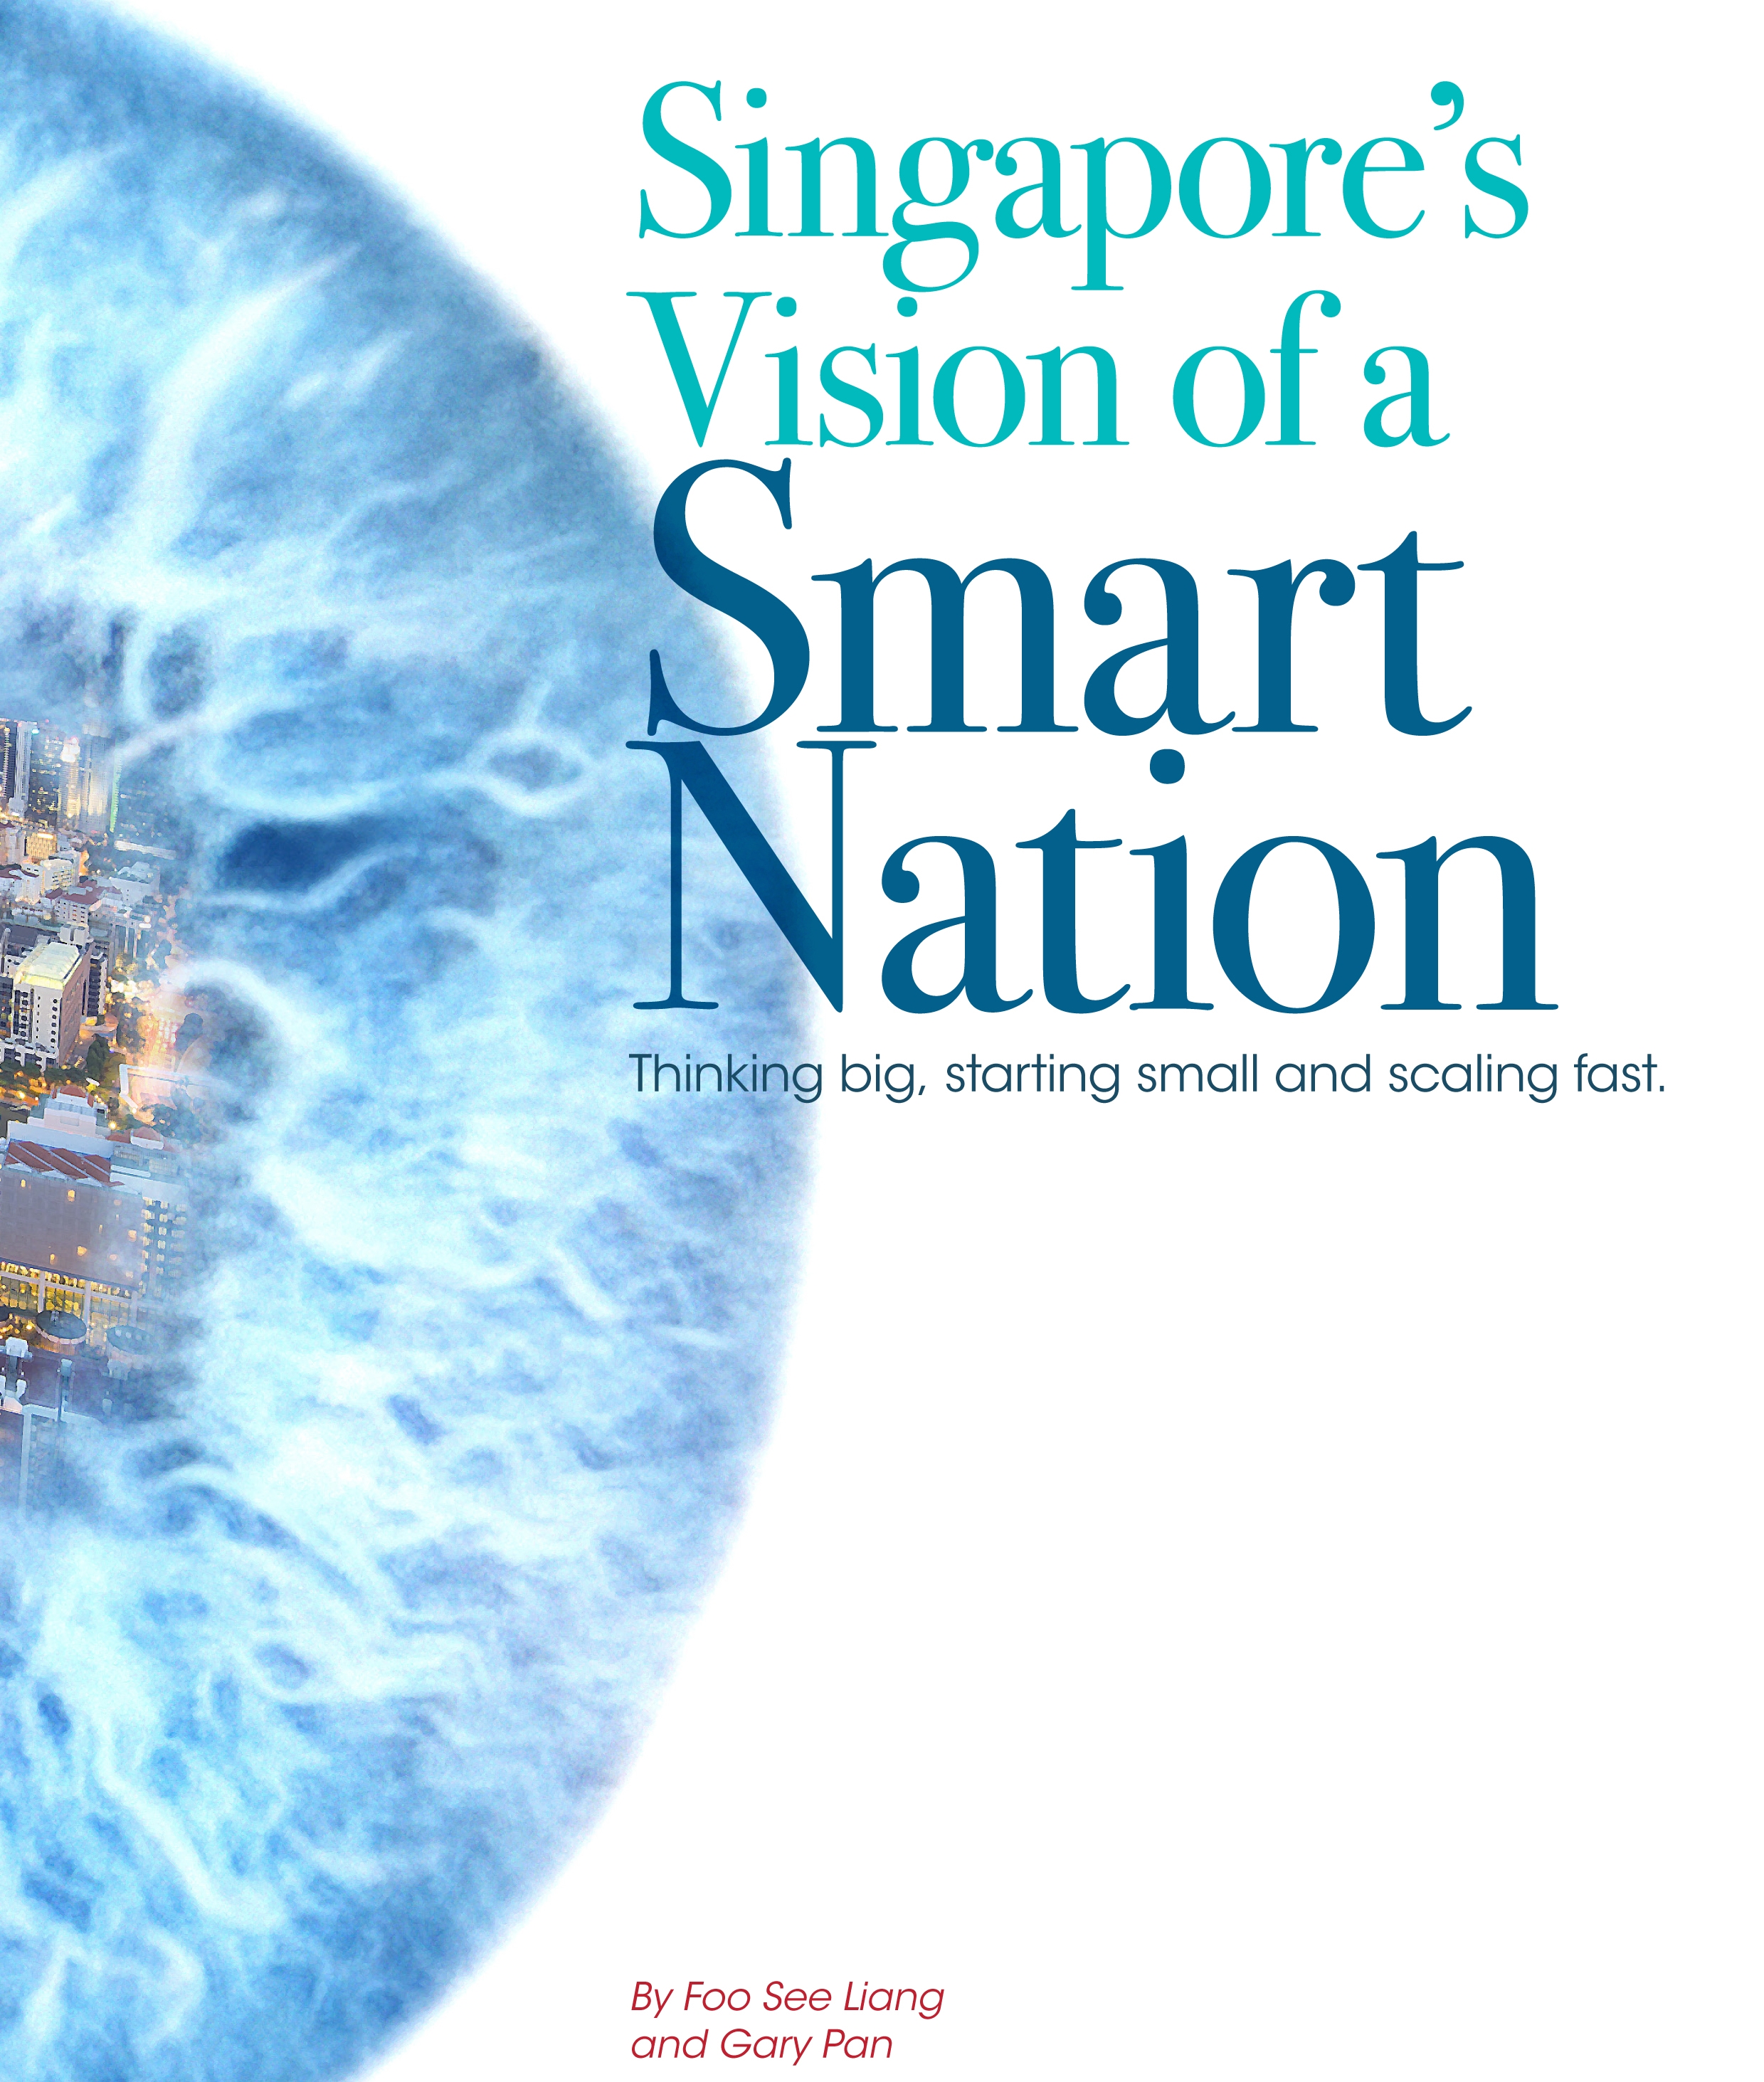 Singapore’s Vision of a Smart Nation